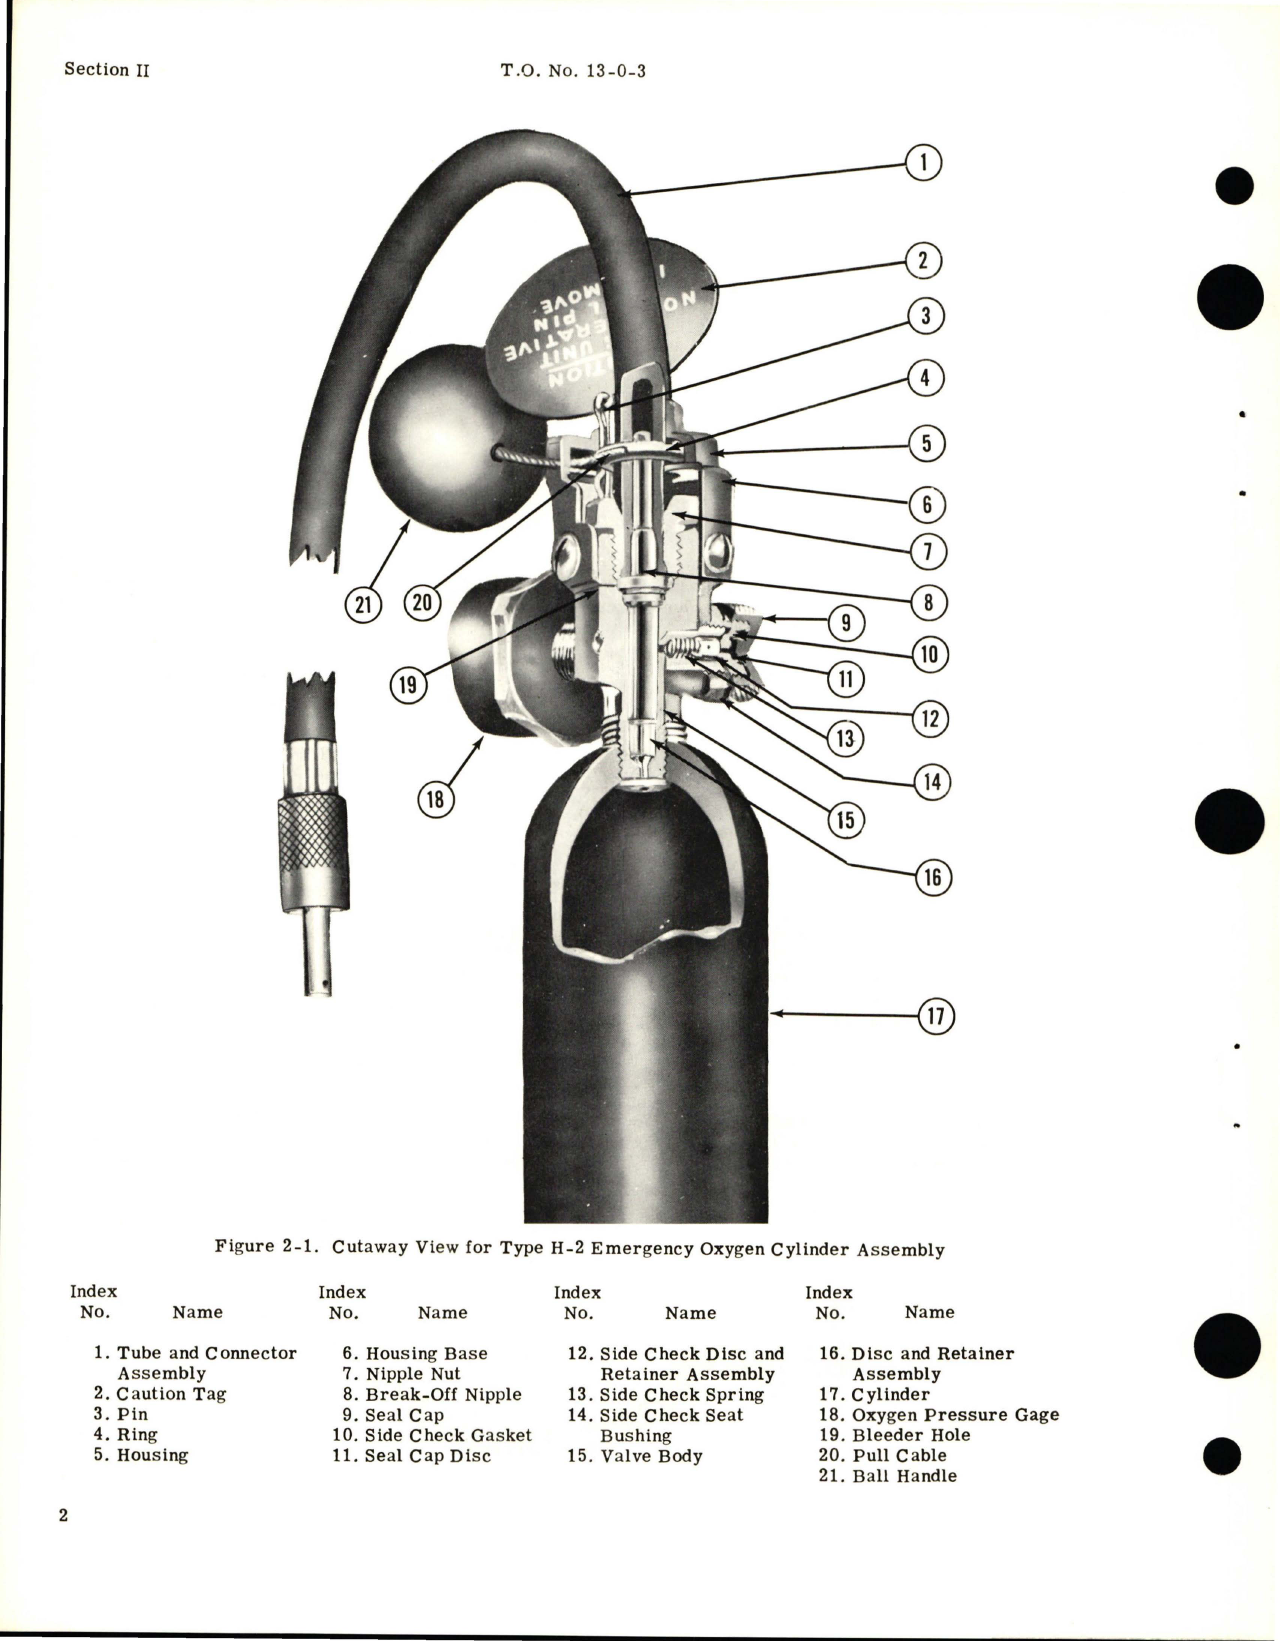 Sample page 6 from AirCorps Library document: Operation, Service, and Overhaul Instructions for Emergency Bail-Out Oxygen Cylinder - Type H-2